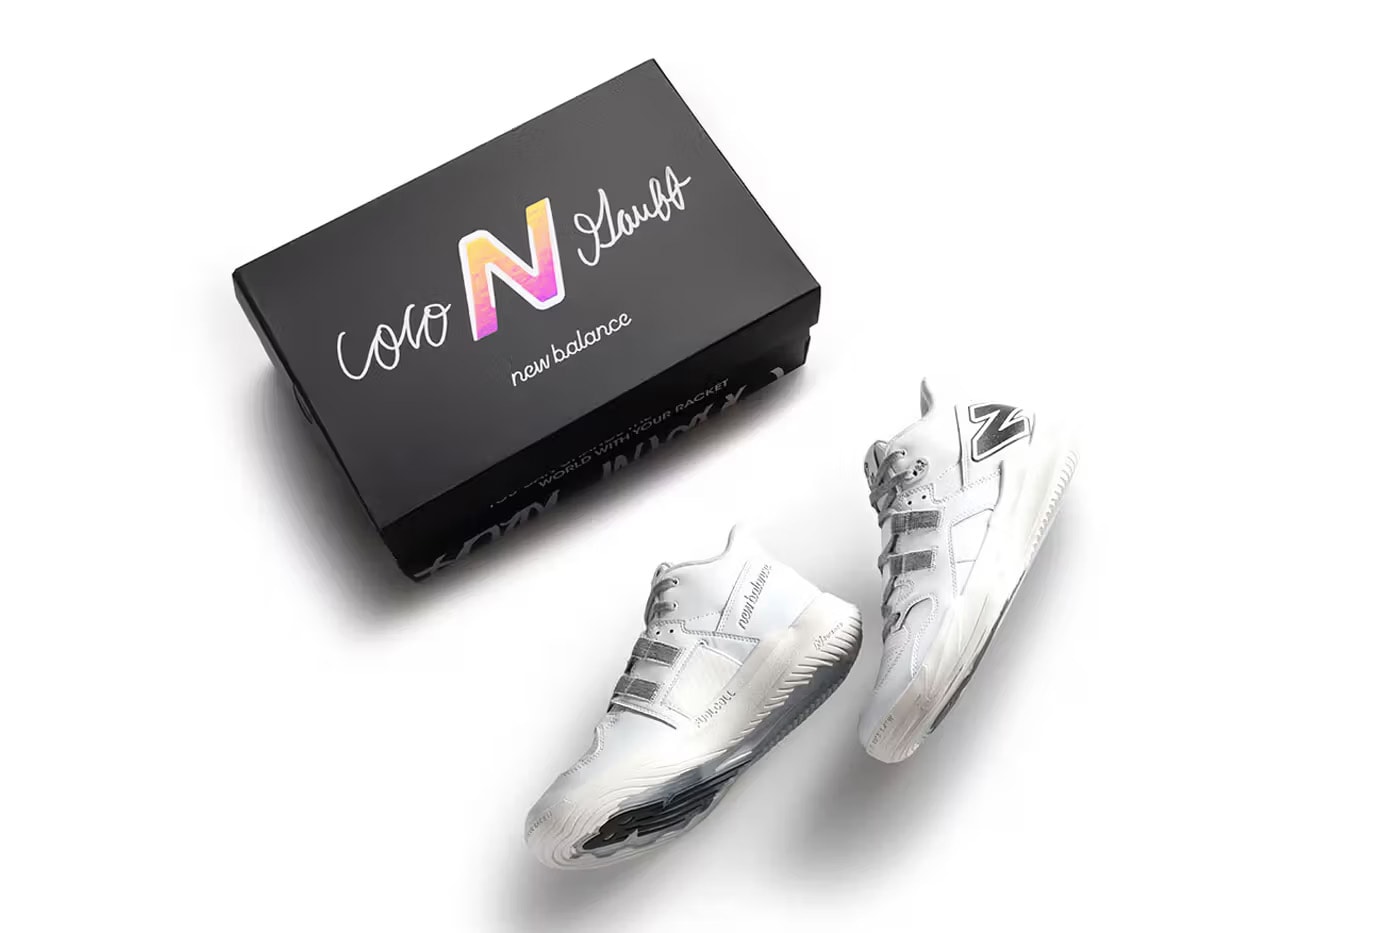 coco gauff new balance cg1 sneakers collaboration where to buy footwear